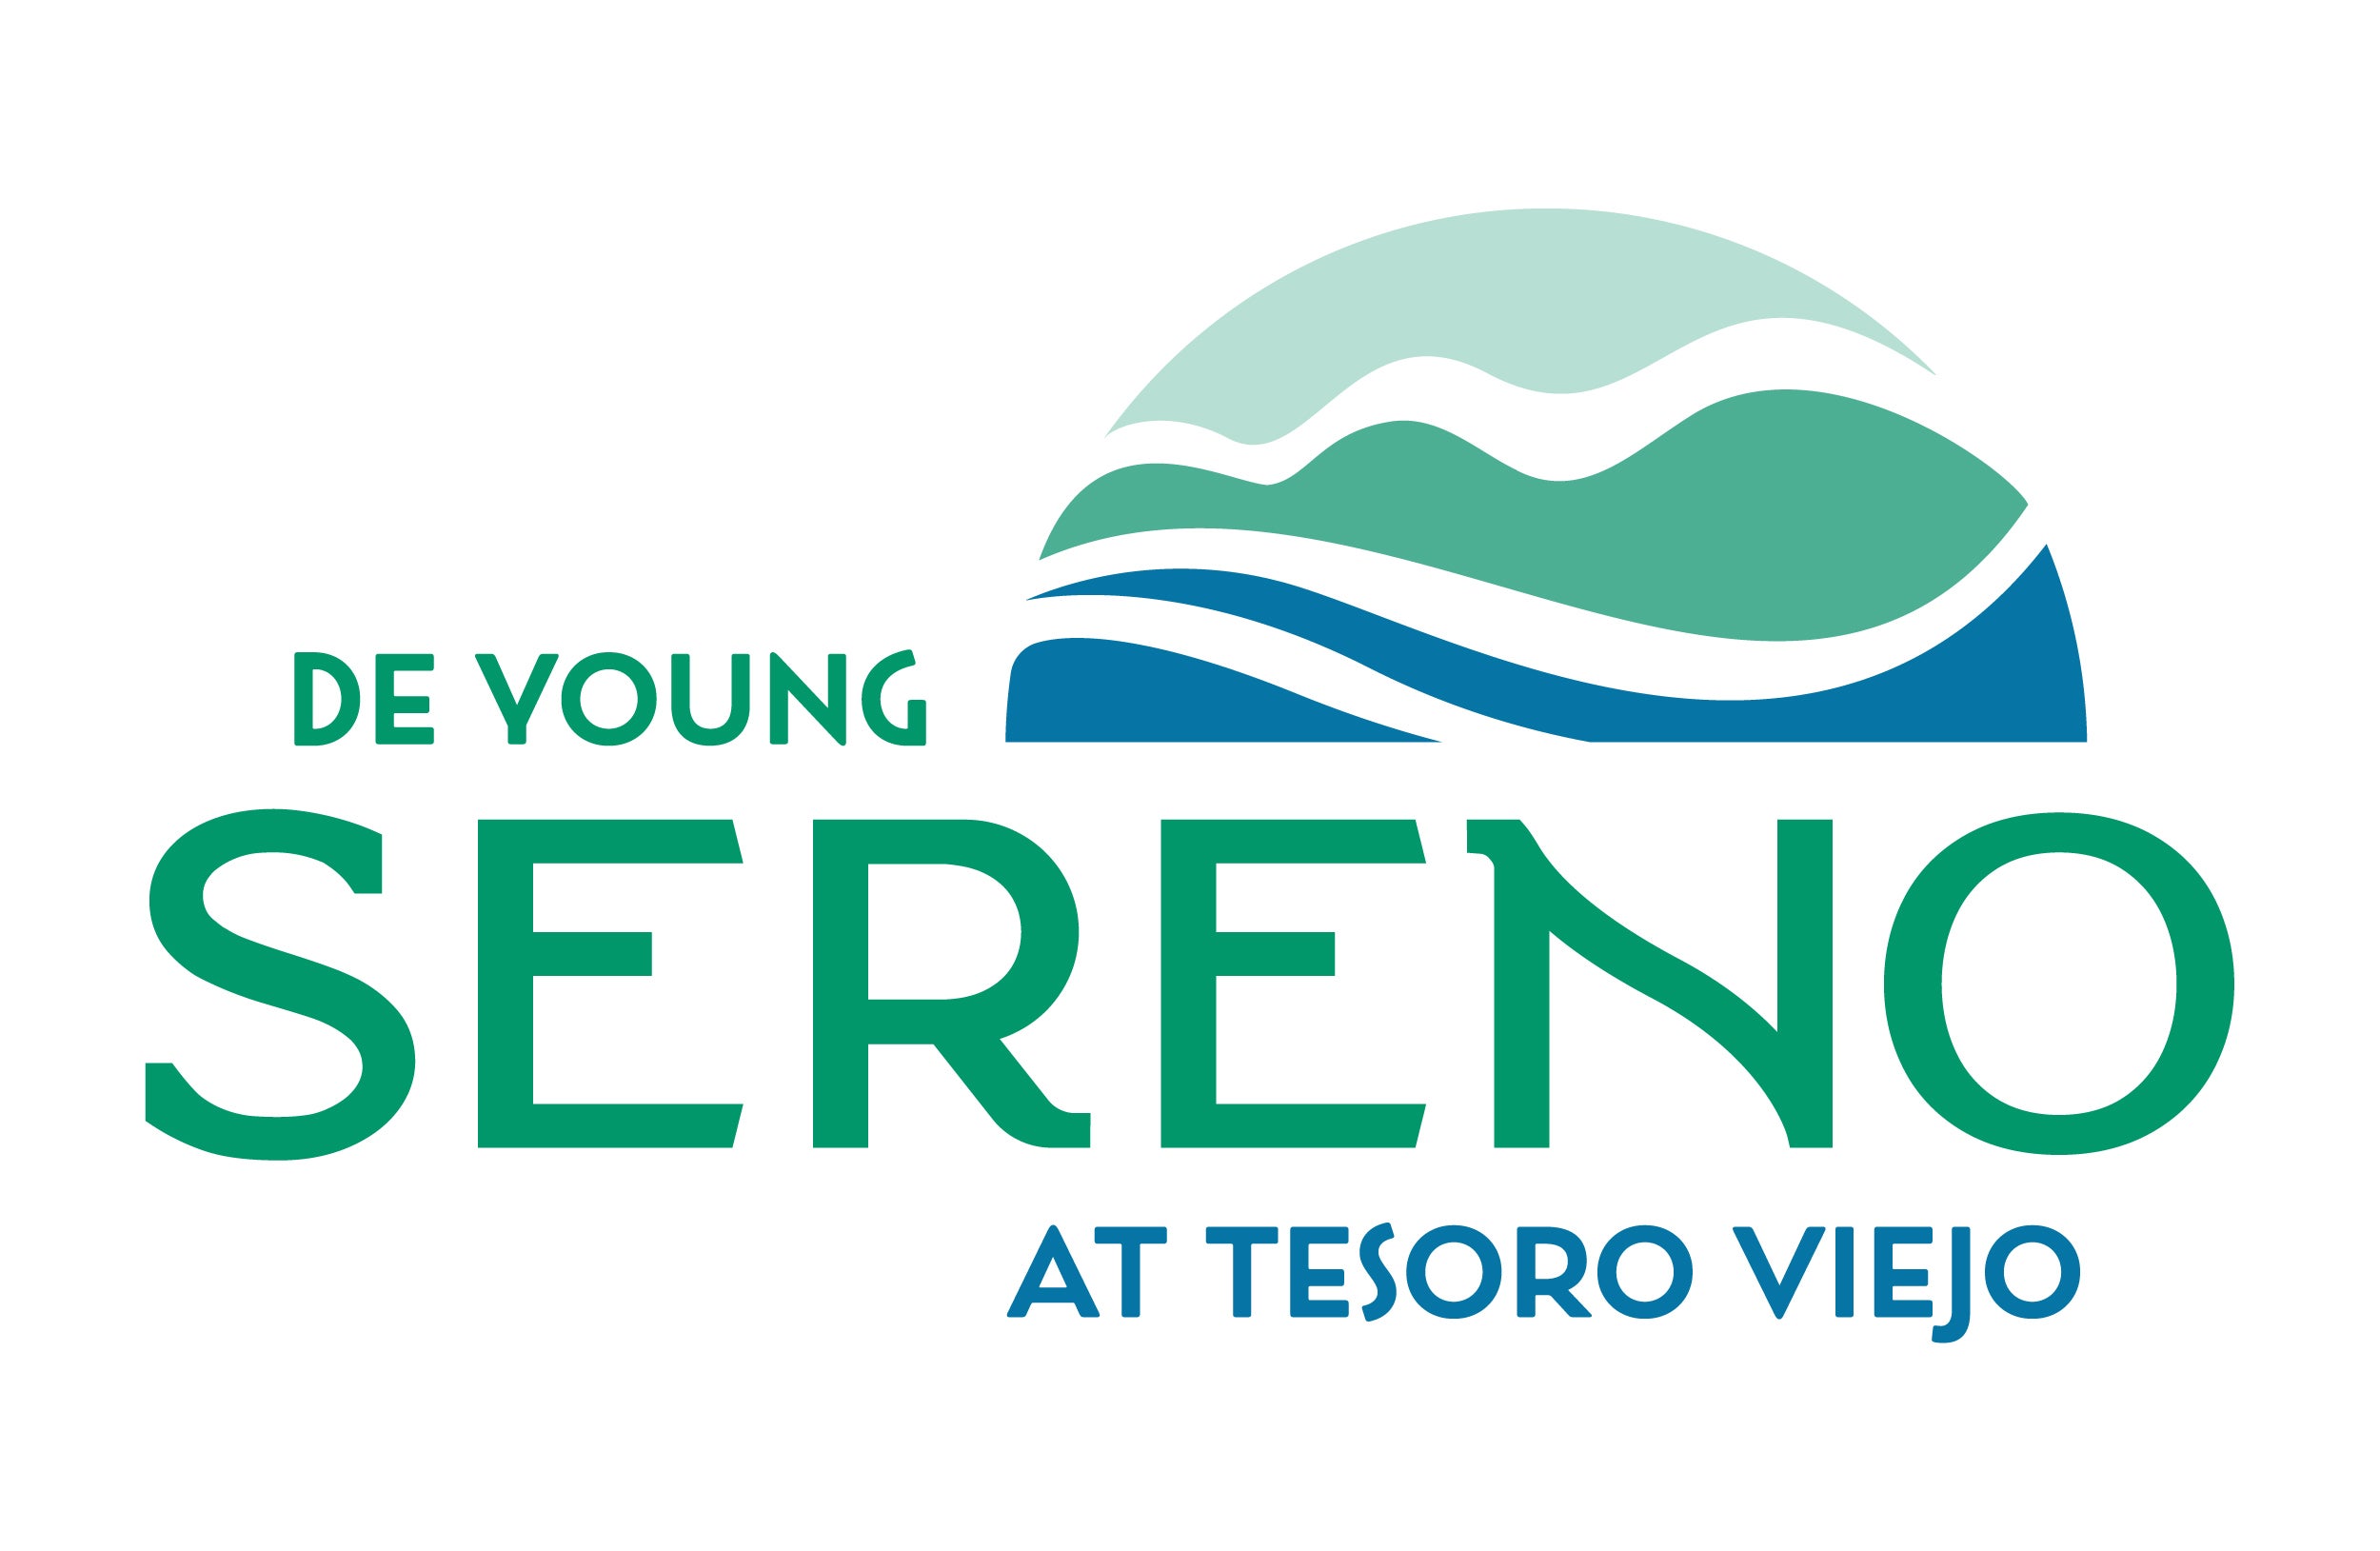 NEWEST DE YOUNG PROPERTIES COMMUNITY ANNOUNCED AT TESORO VIEJO